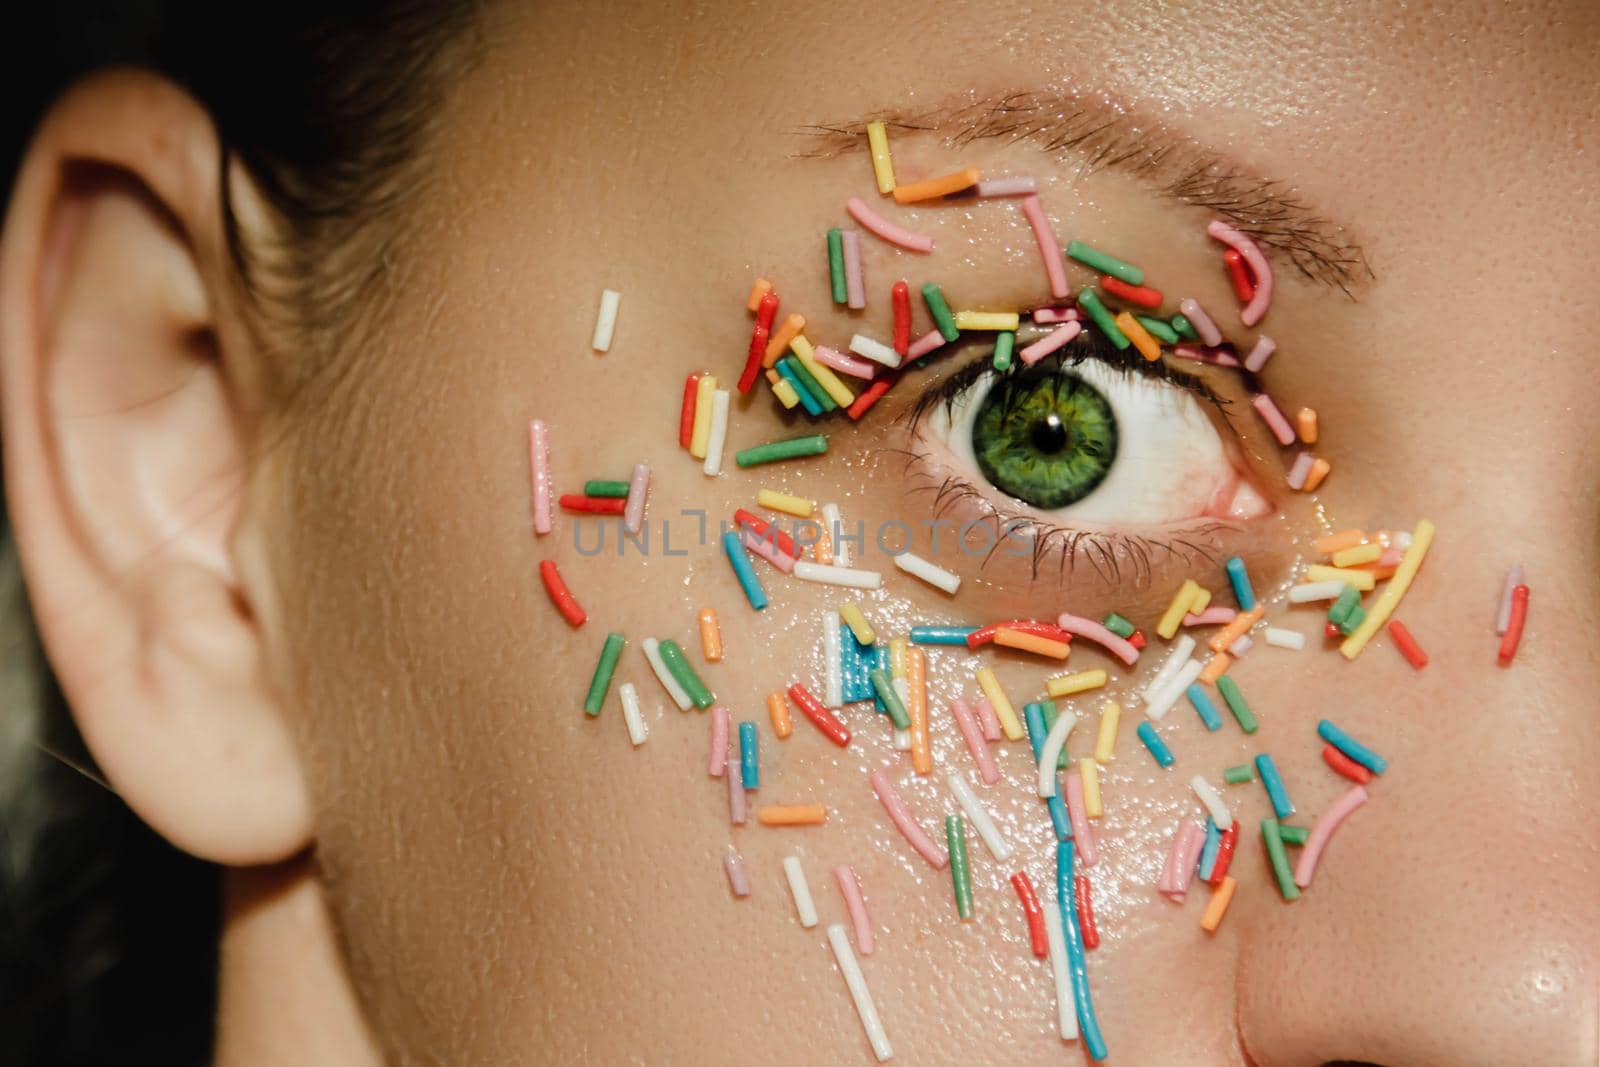 An open, green woman's eye with a sweet, multicolored sprinkle on the eyelid, around the eye